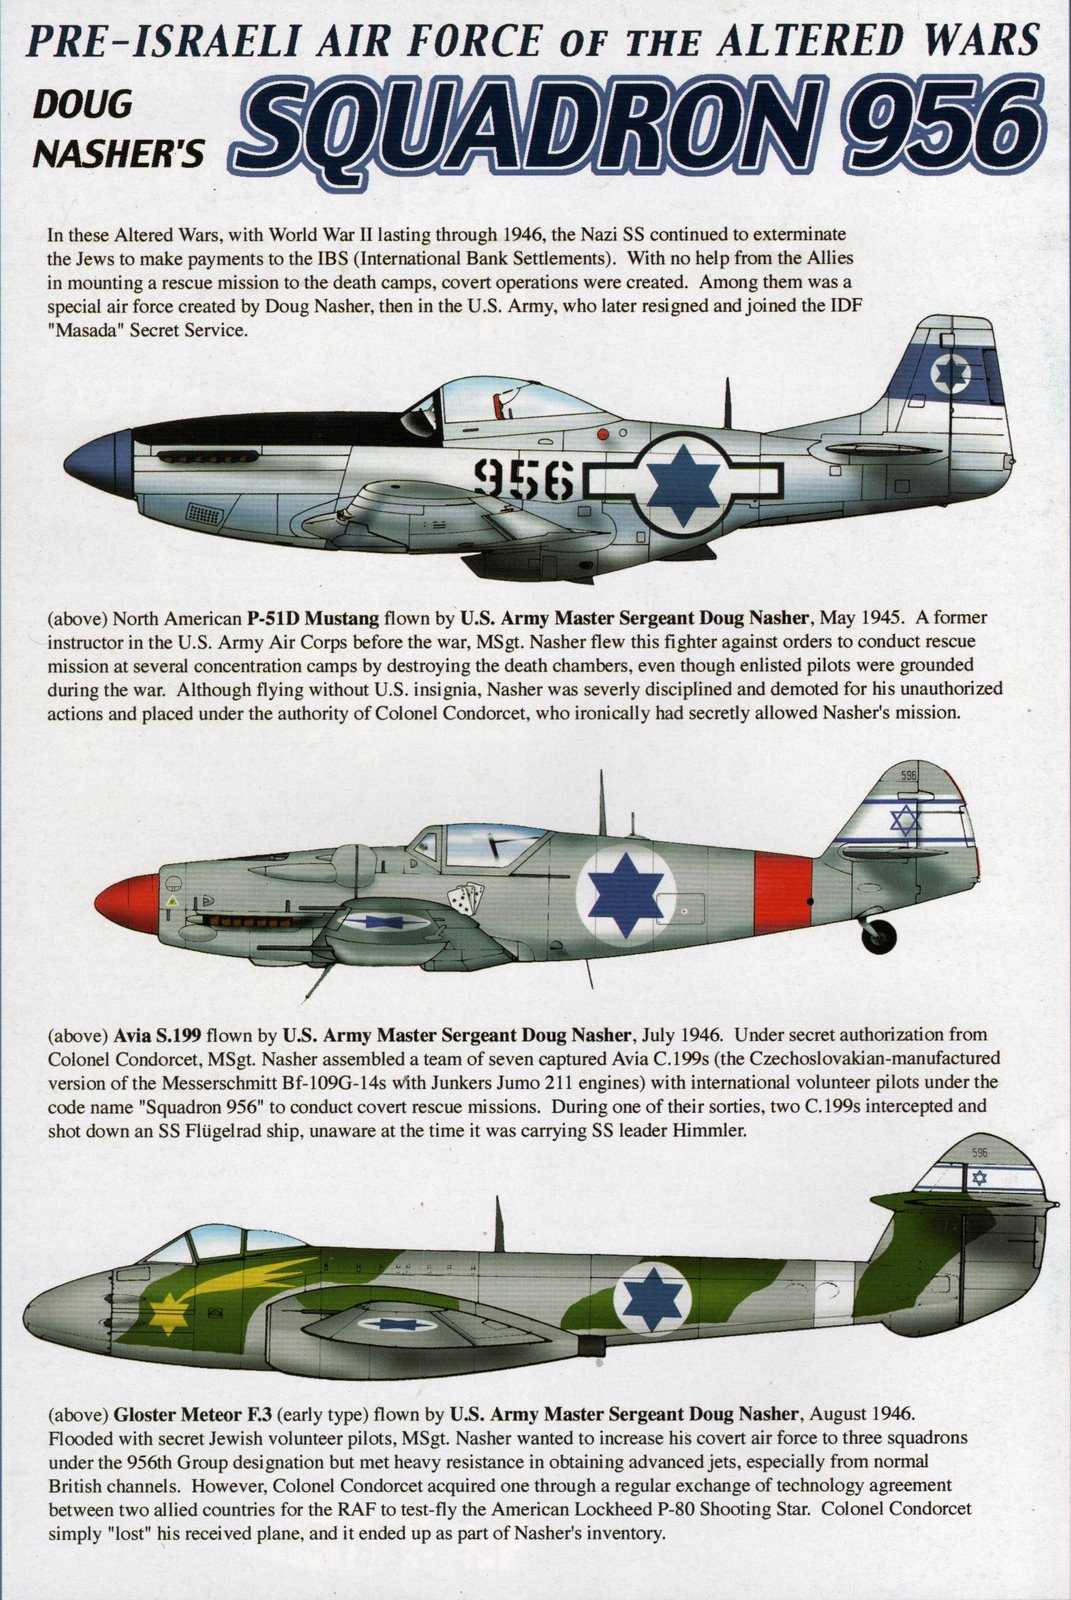 3 of the planes used in the fictional story